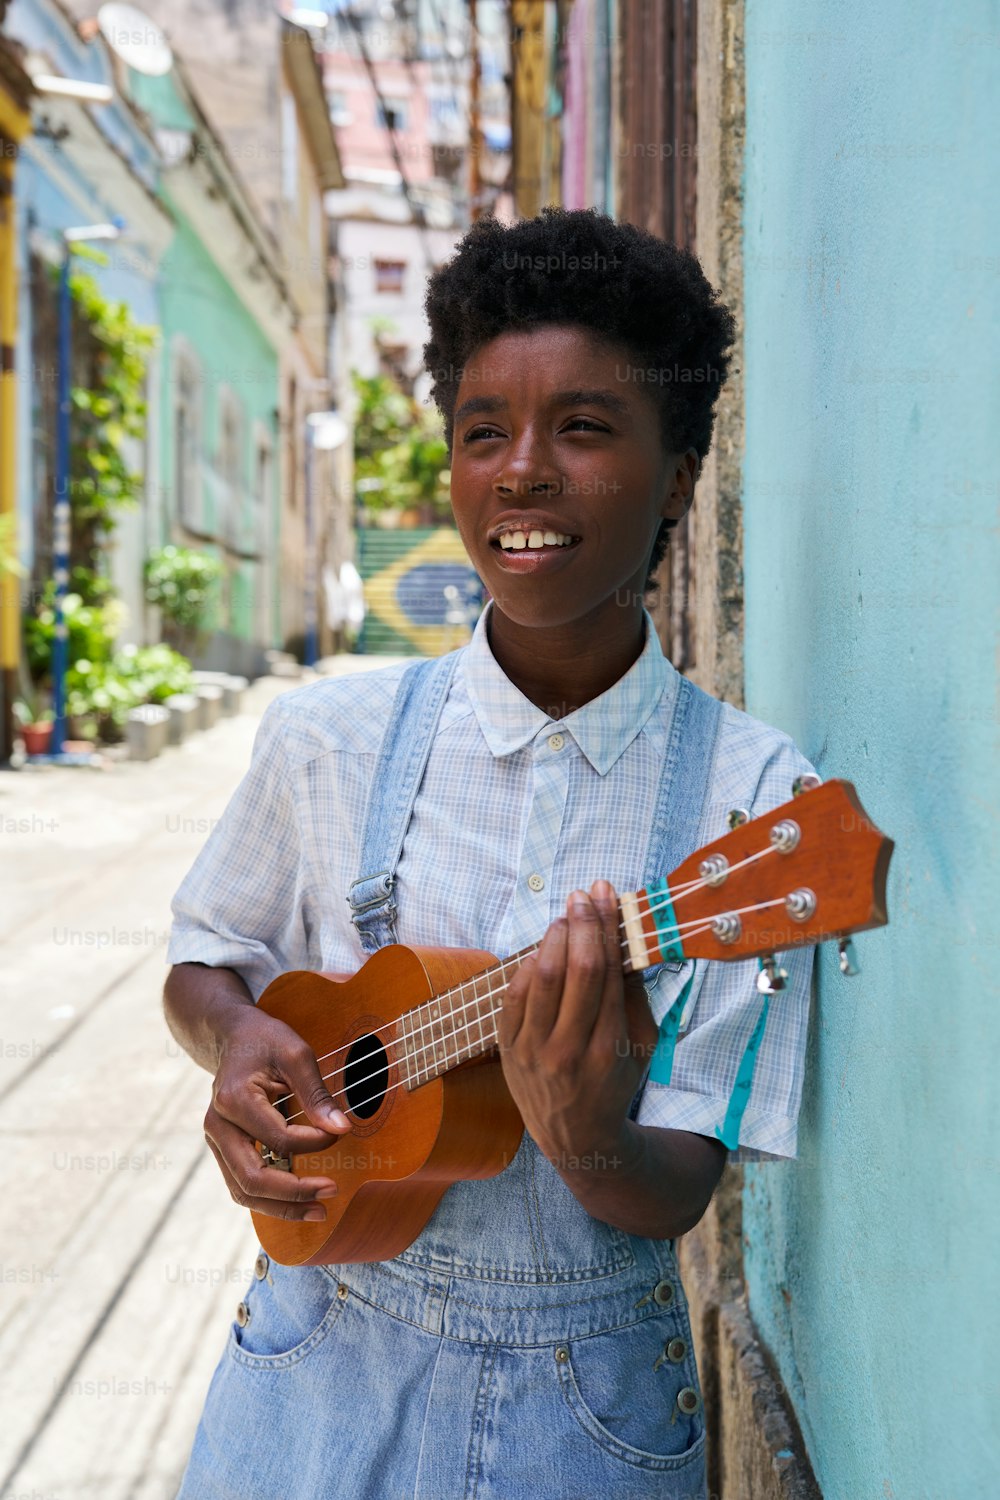 a young man holding a ukulele standing next to a wall